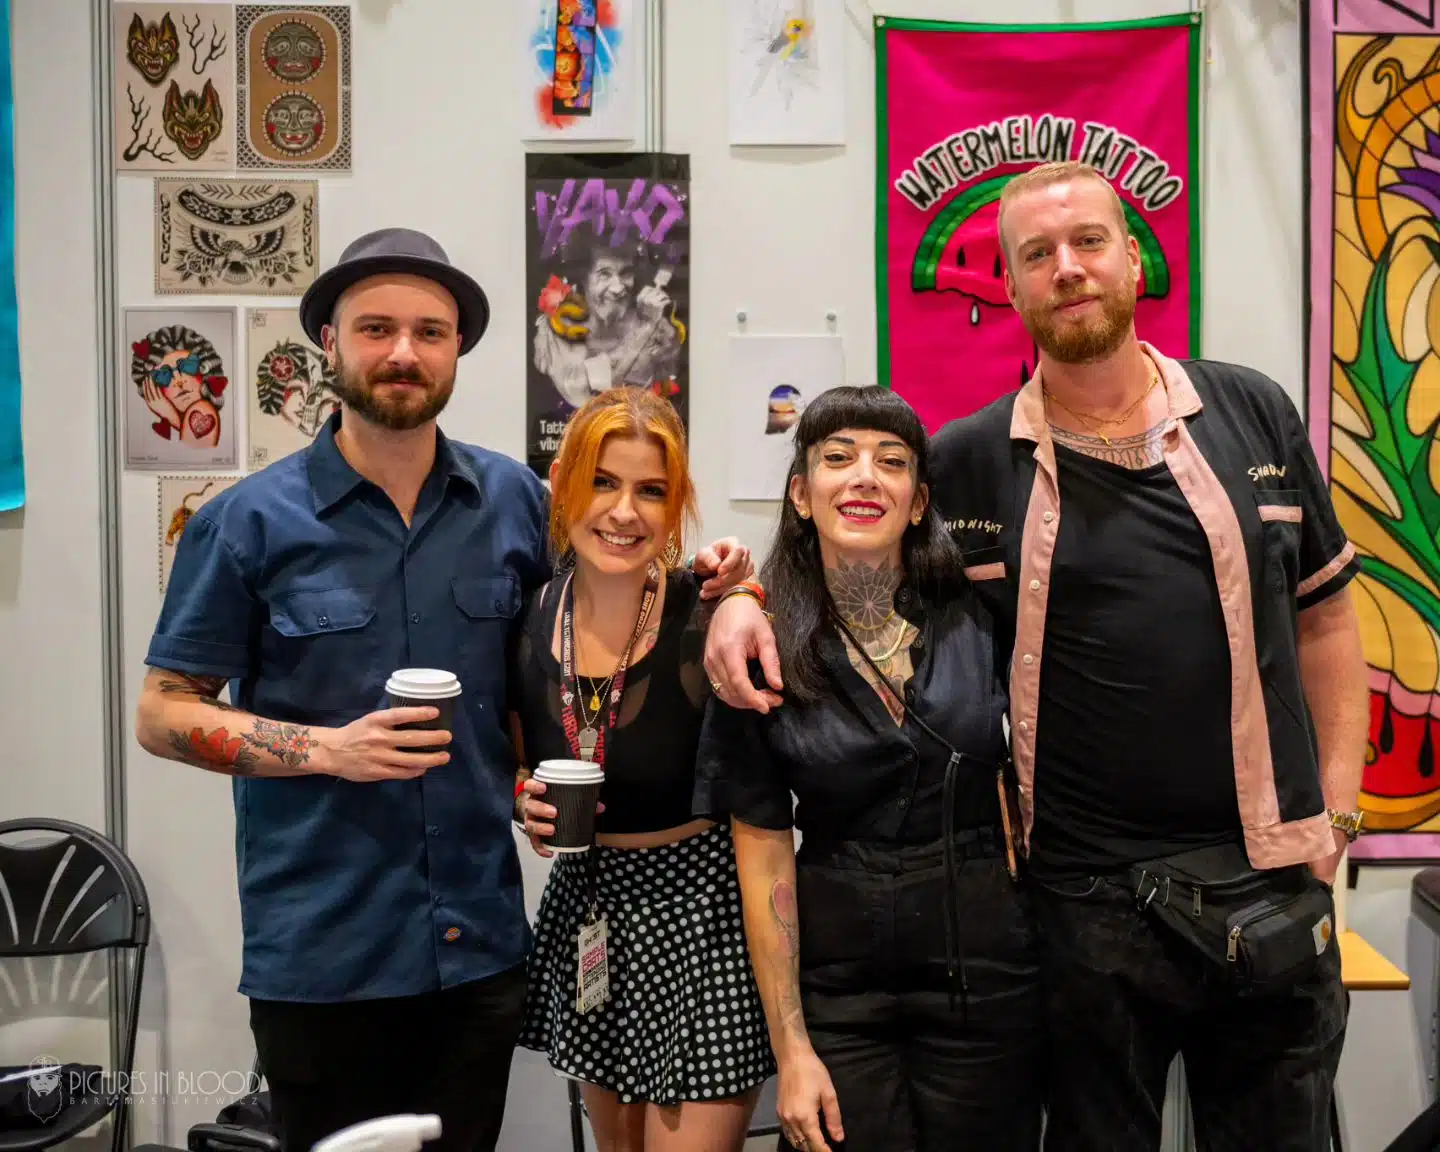 Thanks for the capture picturesinblood , pleasure seeing you last weekend! We all had such a fab time at biglondontattooshow 
Team Watermelon xx

  